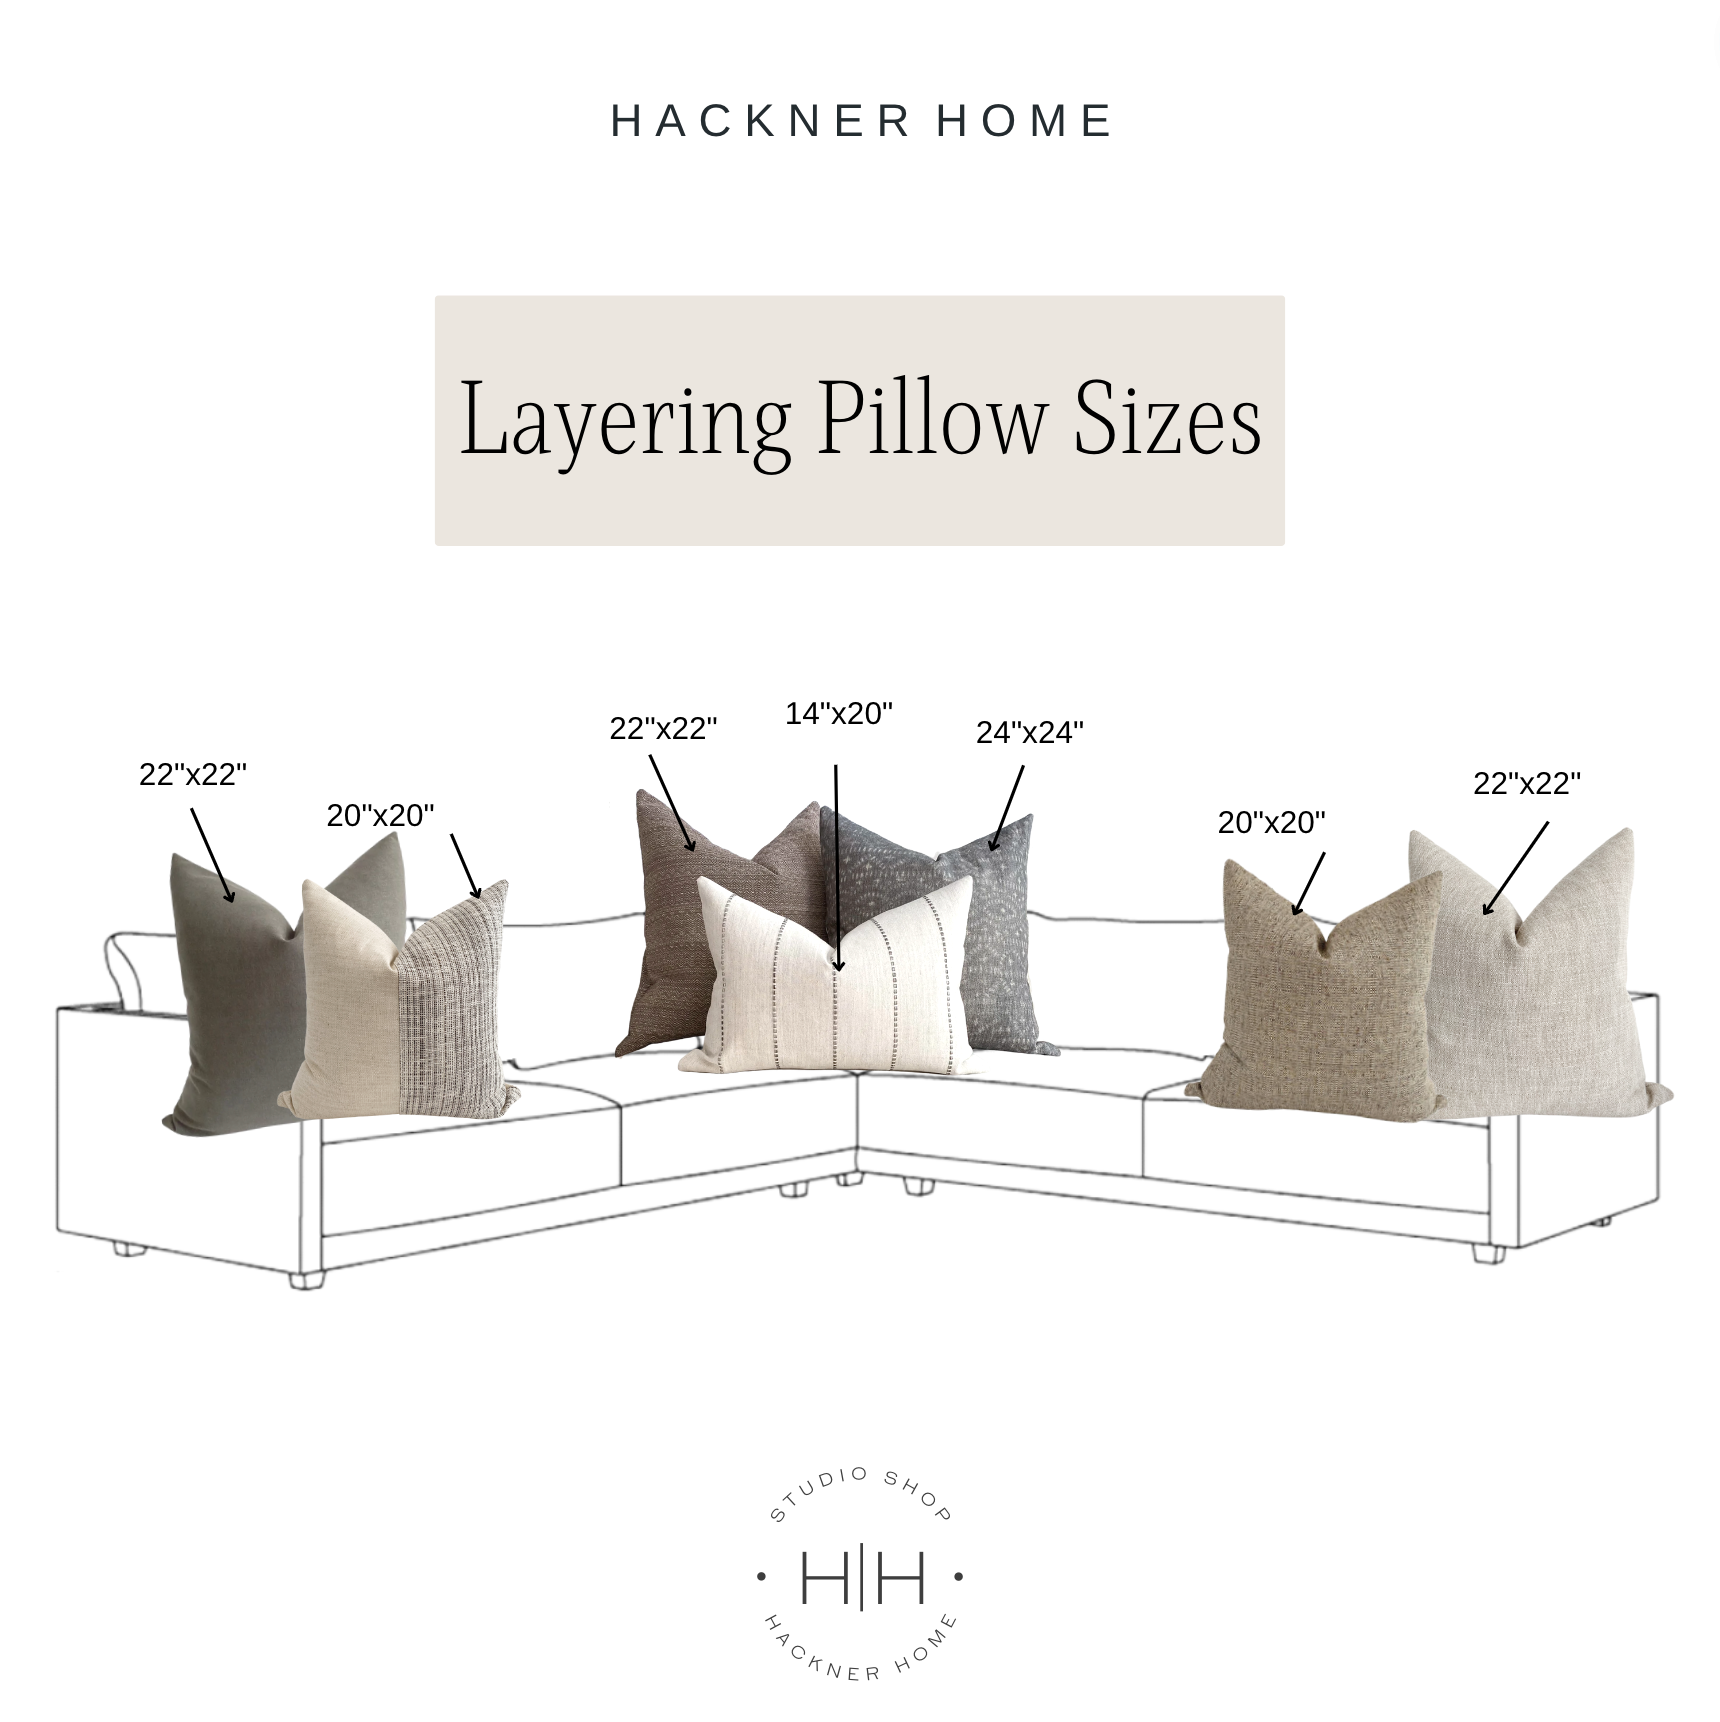 How to style pillows on a sectional sofa by size by HACKNER HOME.